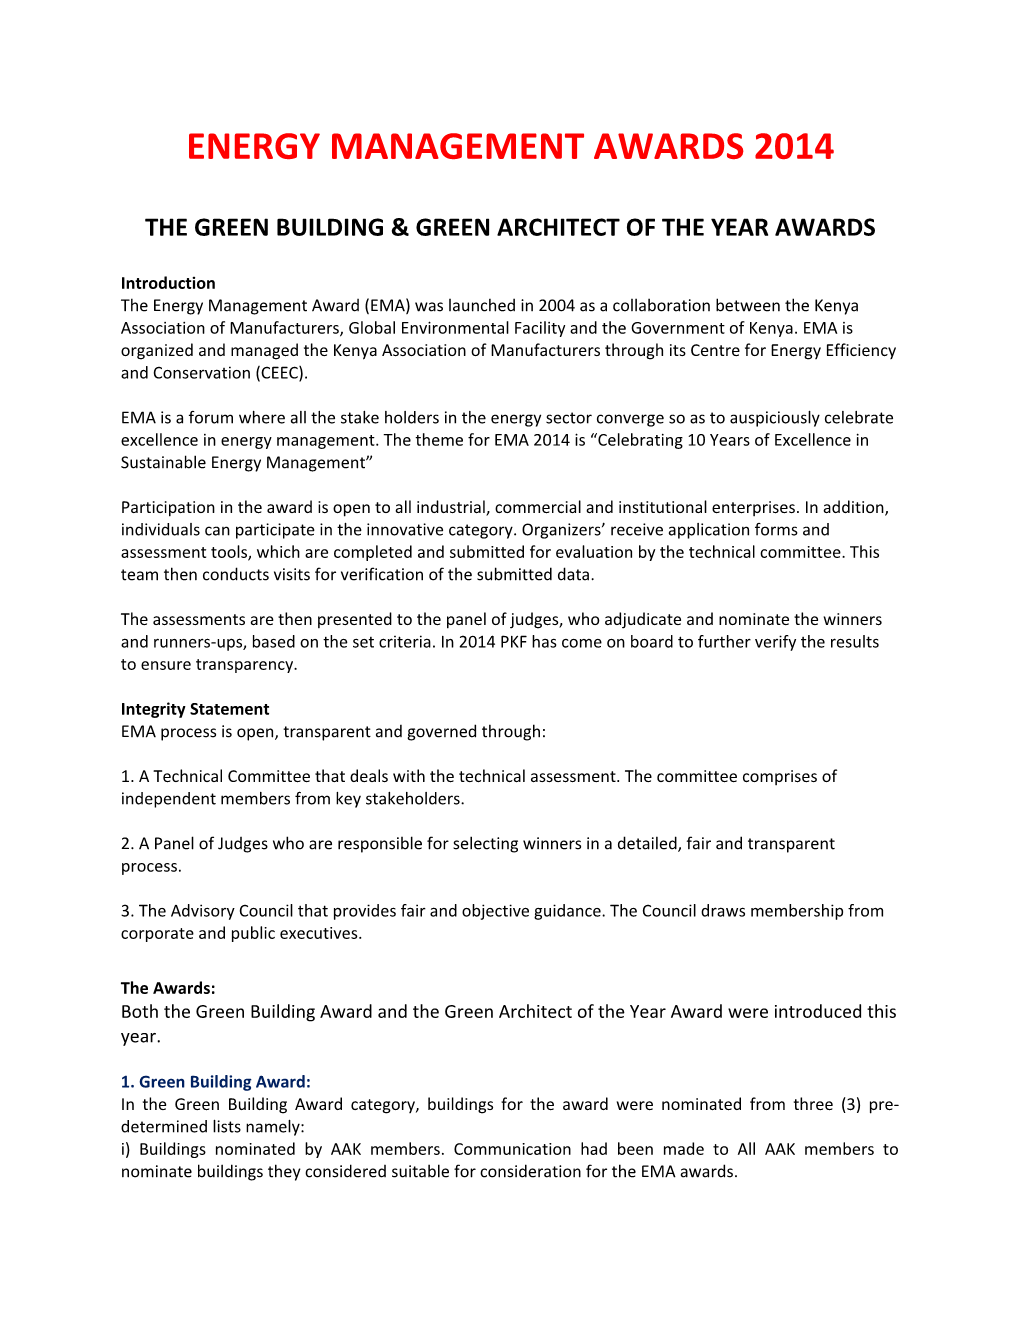 The Green Building & Green Architect of the Year Awards